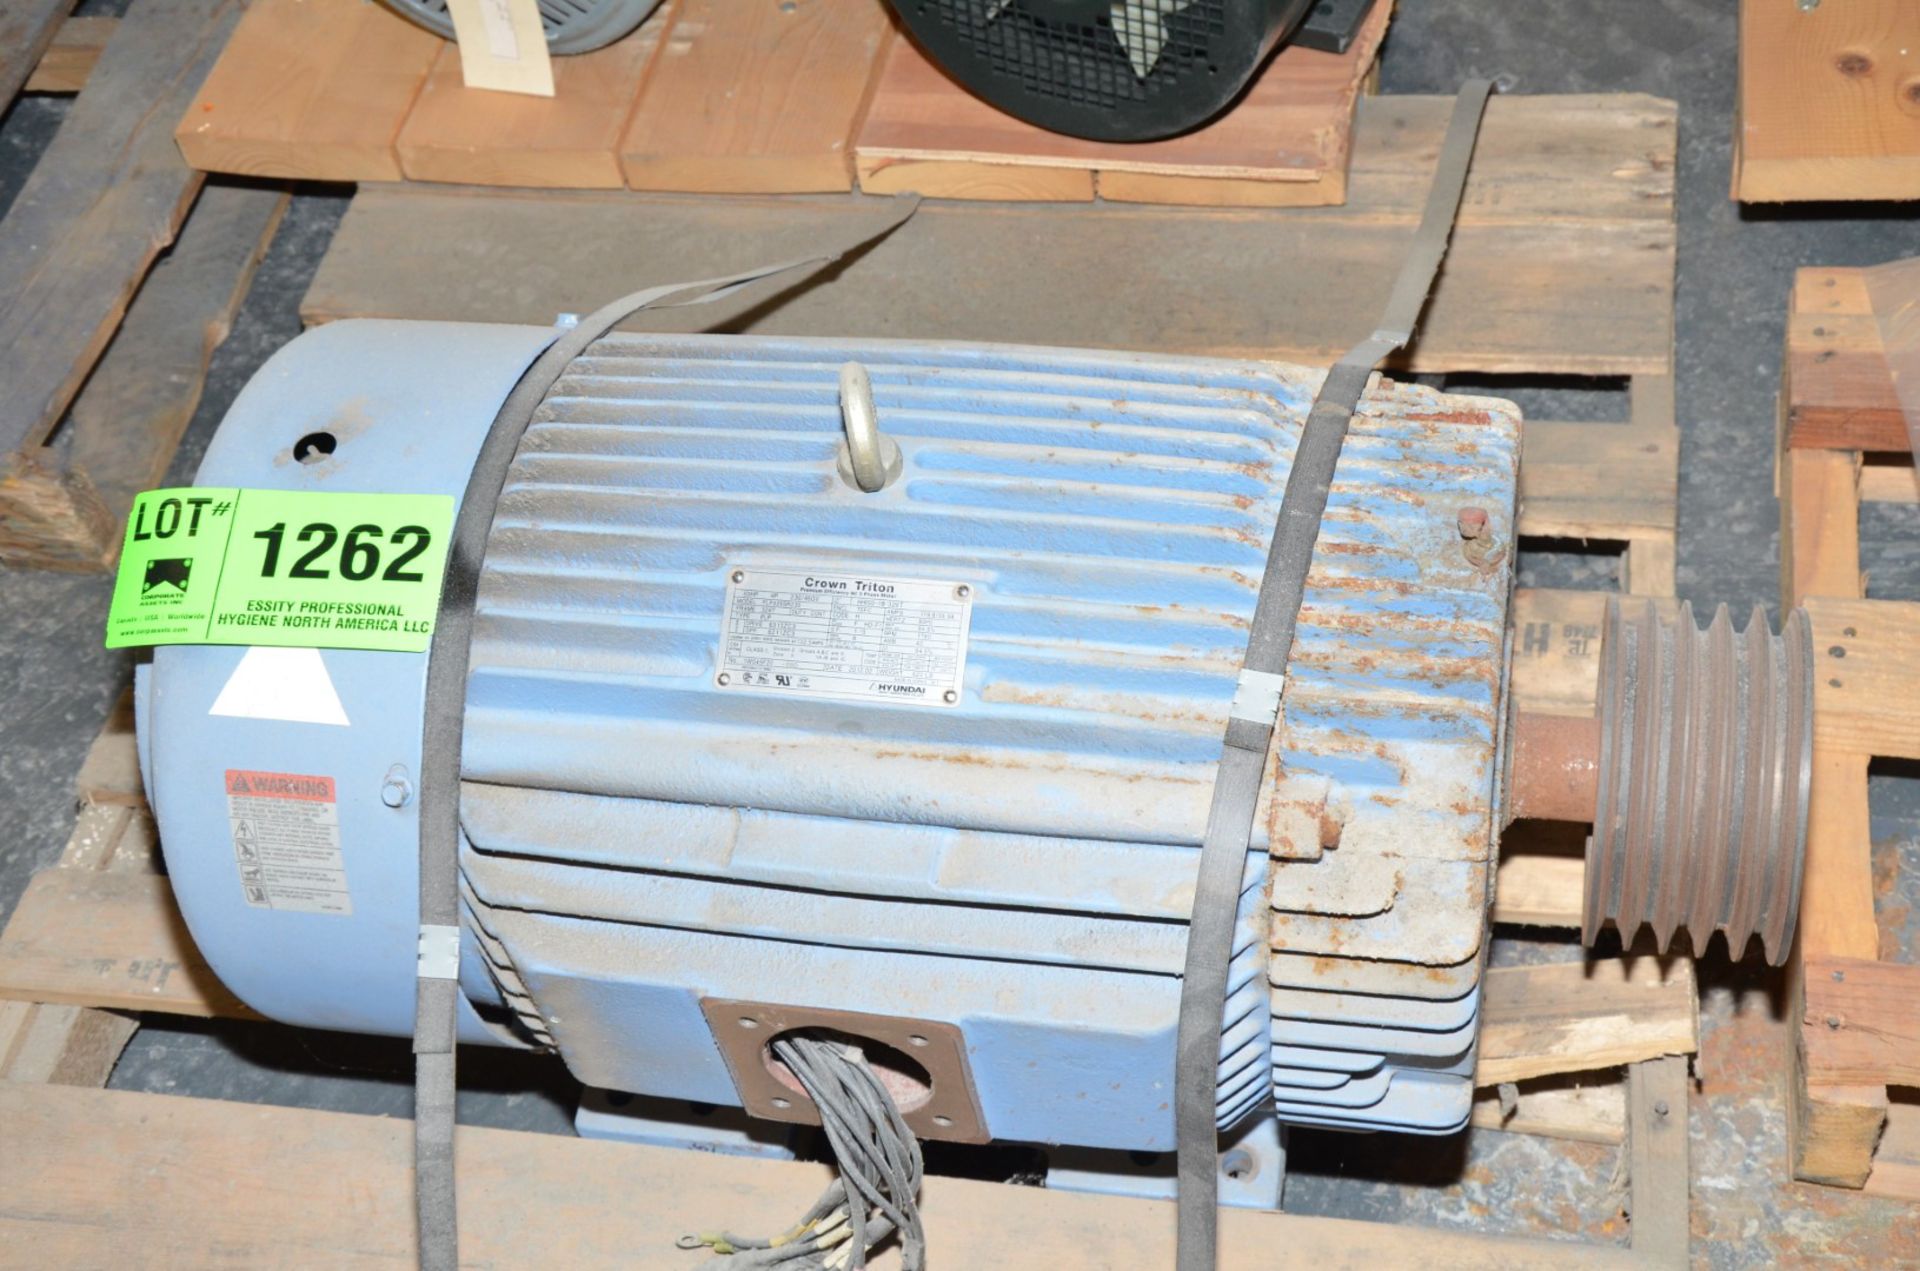 HYUNDAI 50 HP 460V 1780 RPM ELECTRIC MOTOR [RIGGING FEE FOR LOT #1262 - $25 USD PLUS APPLICABLE